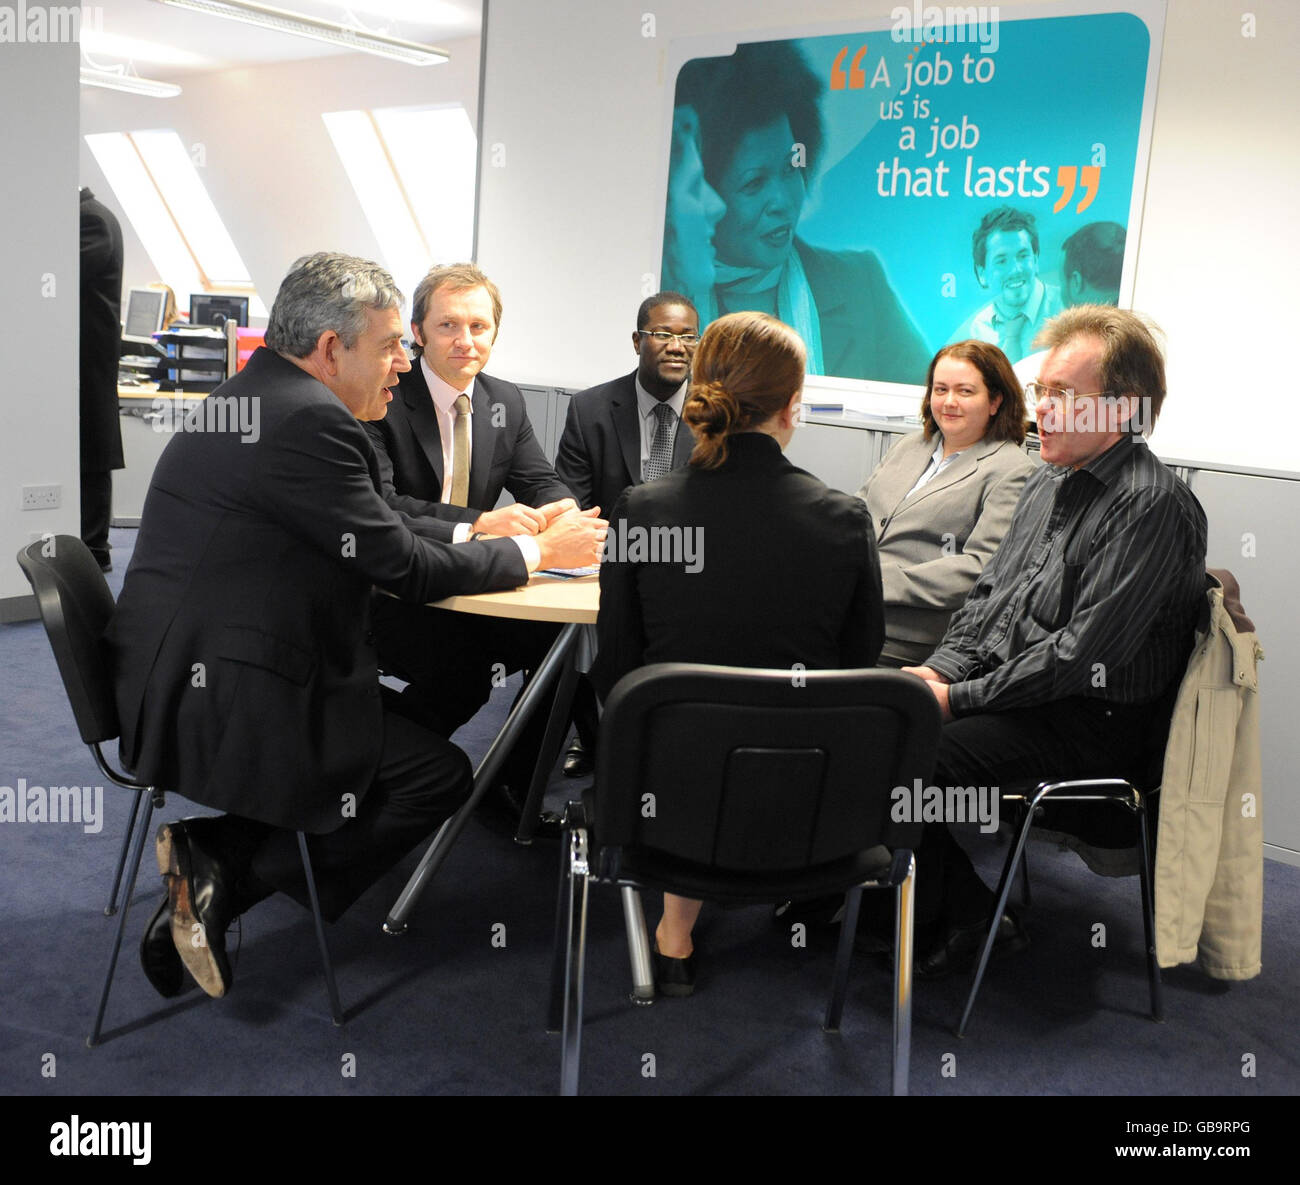 Britain's Prime Minister Gordon Brown (left) and Work and Pensions Secretary James Purnell (second left) during a visit to Work Directions in London's King's Cross, which is a private sector organisation providing employment support and advice to those on incapacity benefit or income support. Stock Photo